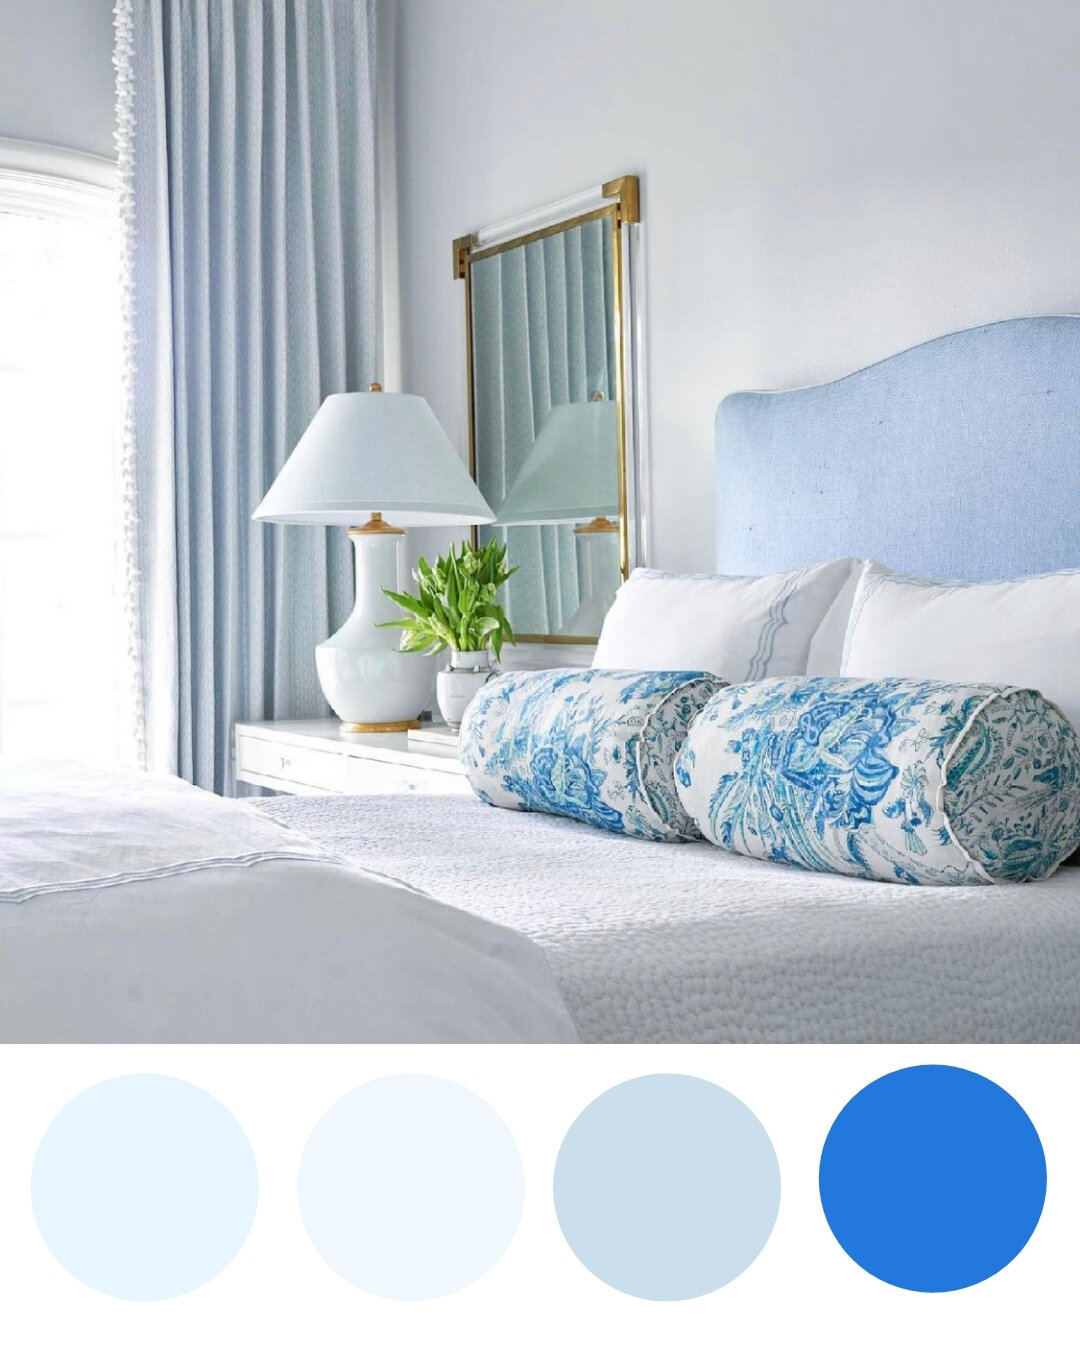 Different Shades of Blue in Interior Design • KBM D3signs